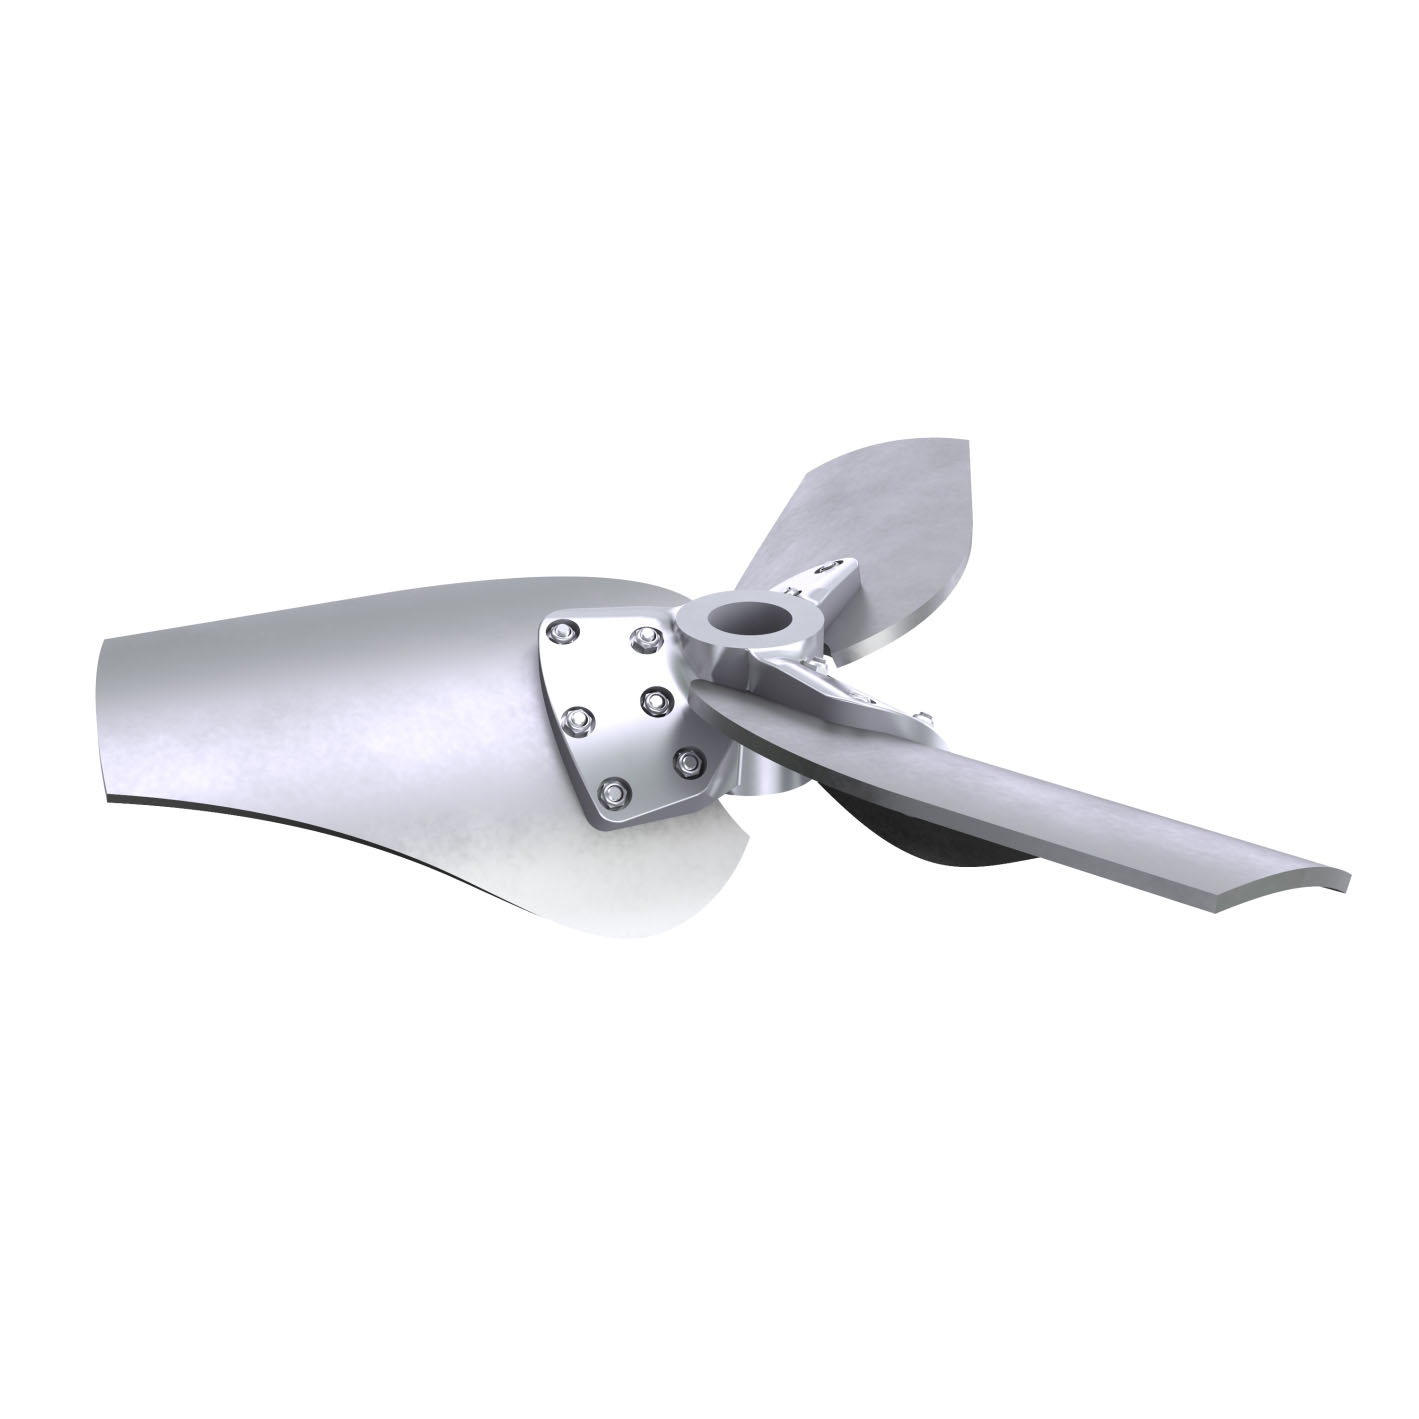 The high-efficiency SHP1 propellers achieve substantial energy savings and a high heat transfer rate